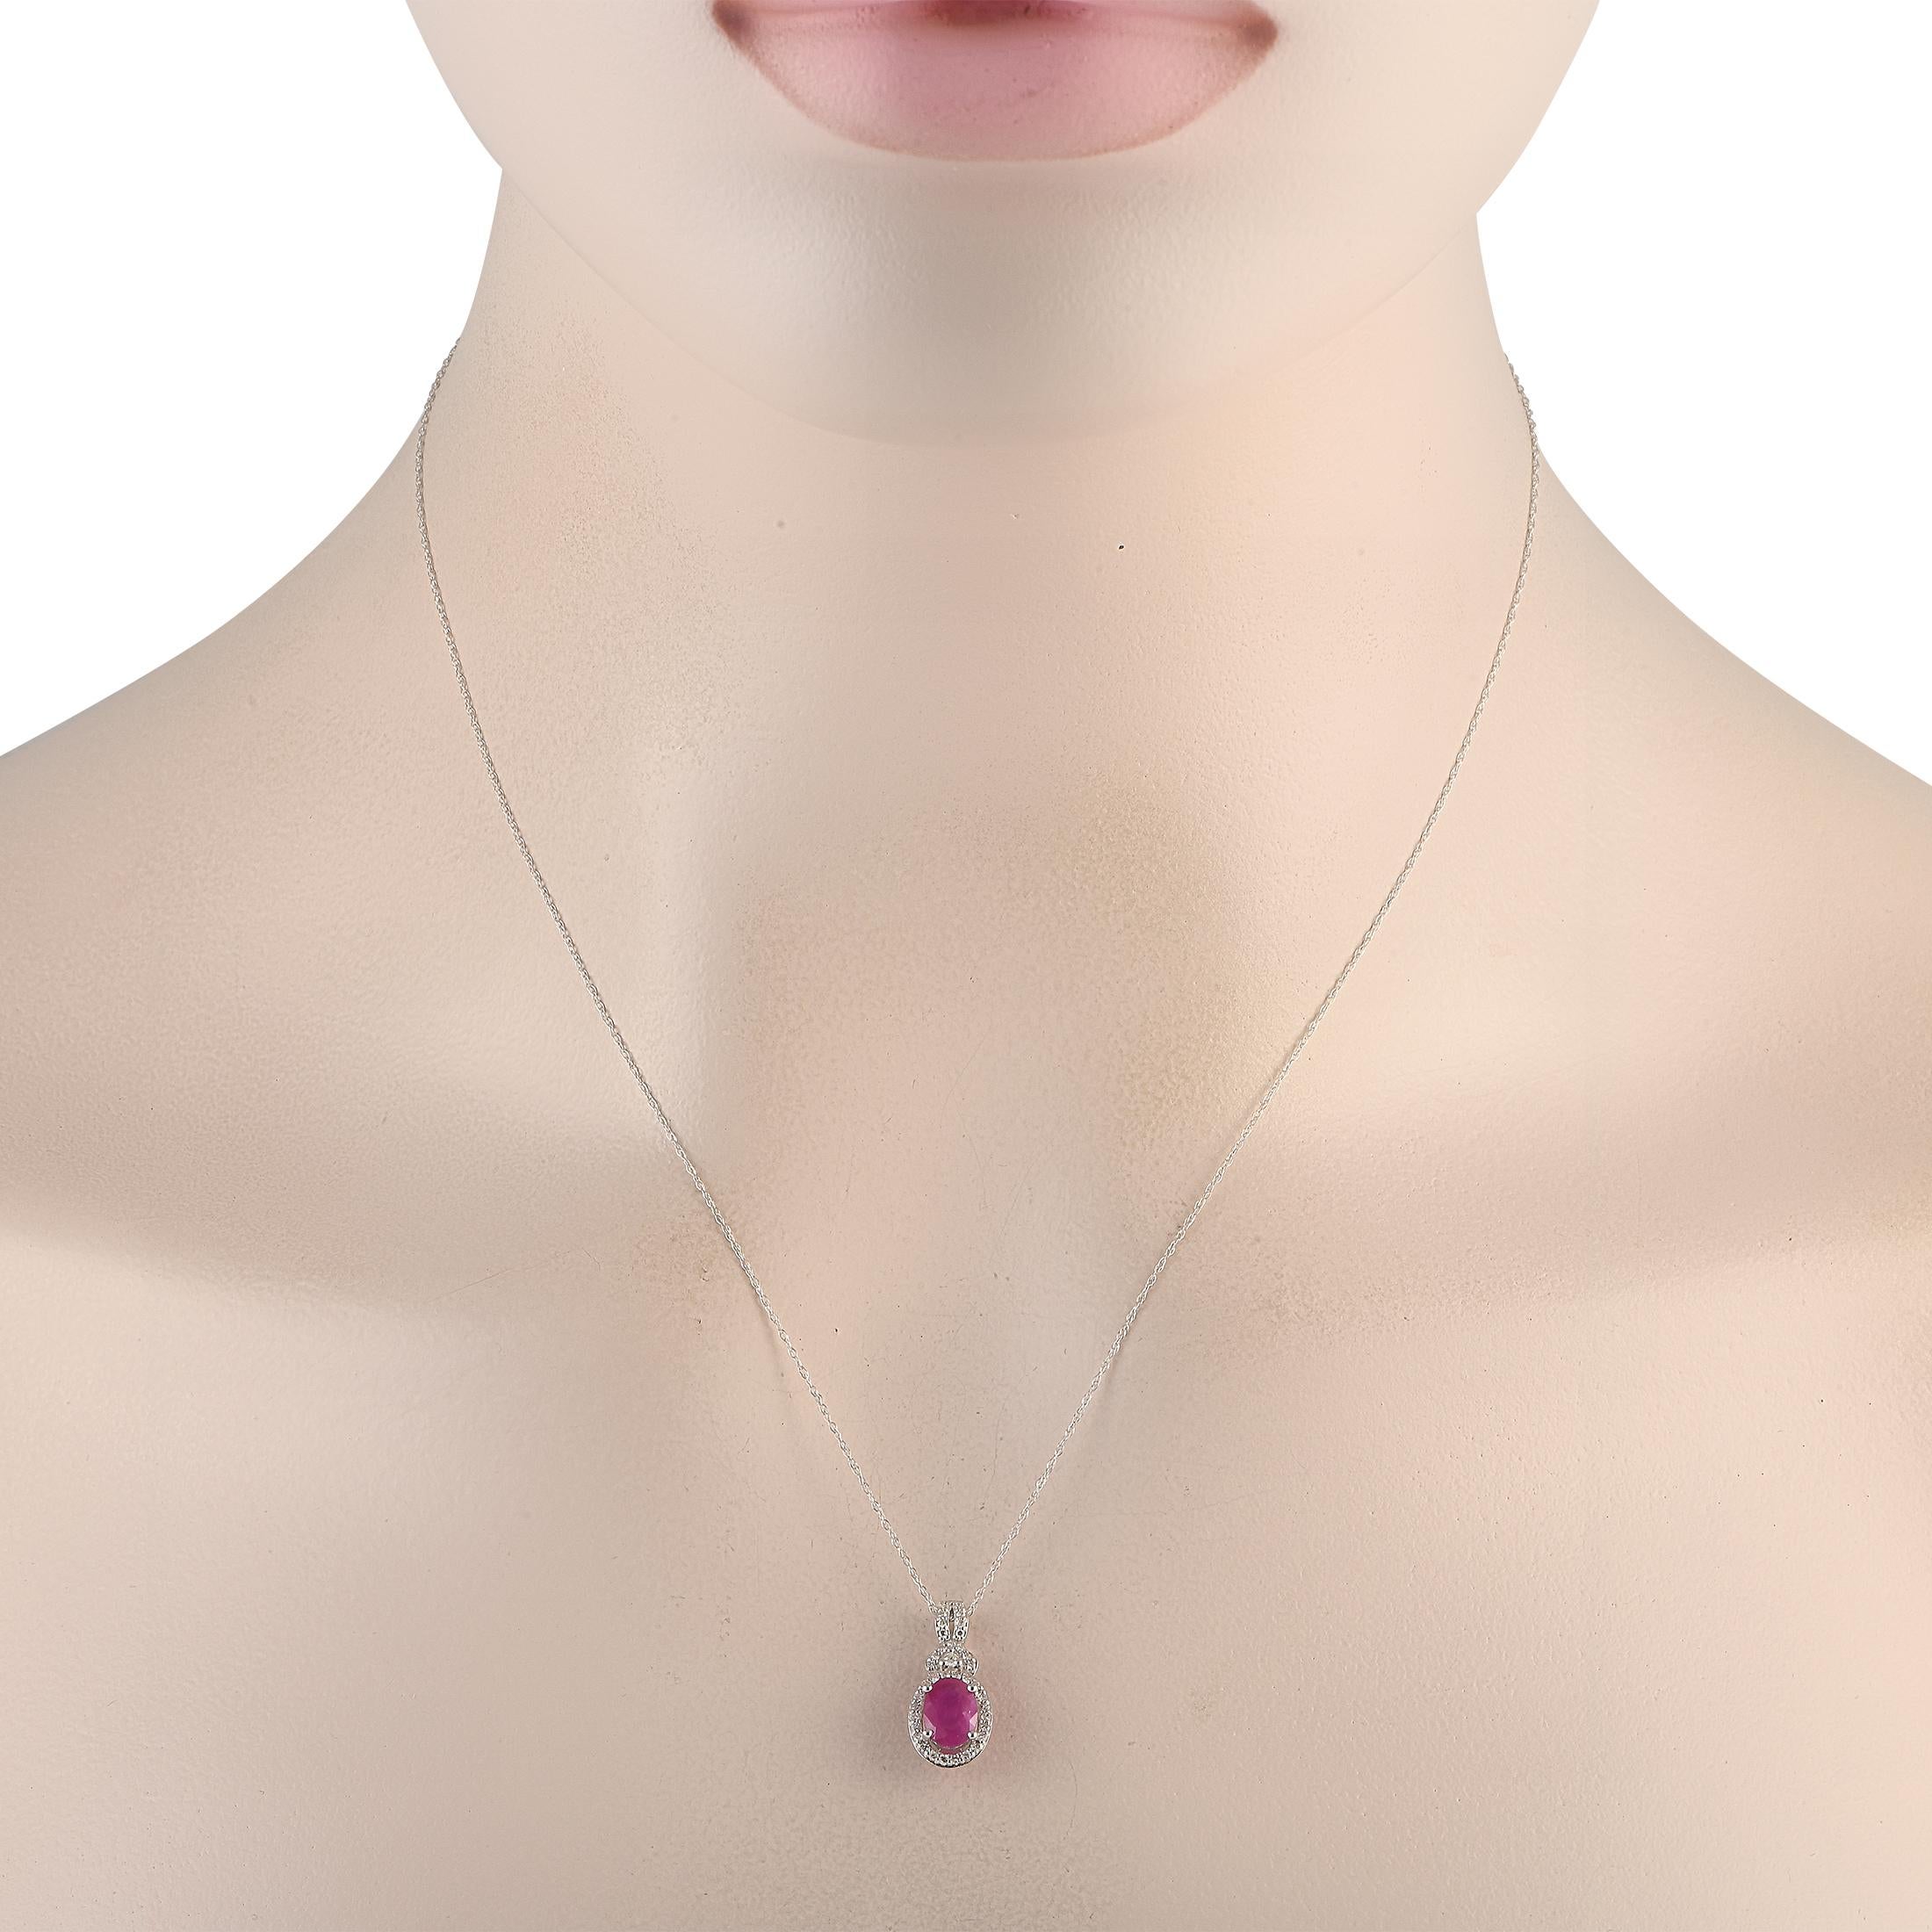 An intricate 14K White Gold pendant measuring 0.75 long and 0.35 wide serves as a stunning focal point on this simple, elegant necklace. The pendants charming Ruby center stone comes to life thanks to a dazzling array of Diamonds with a total weight